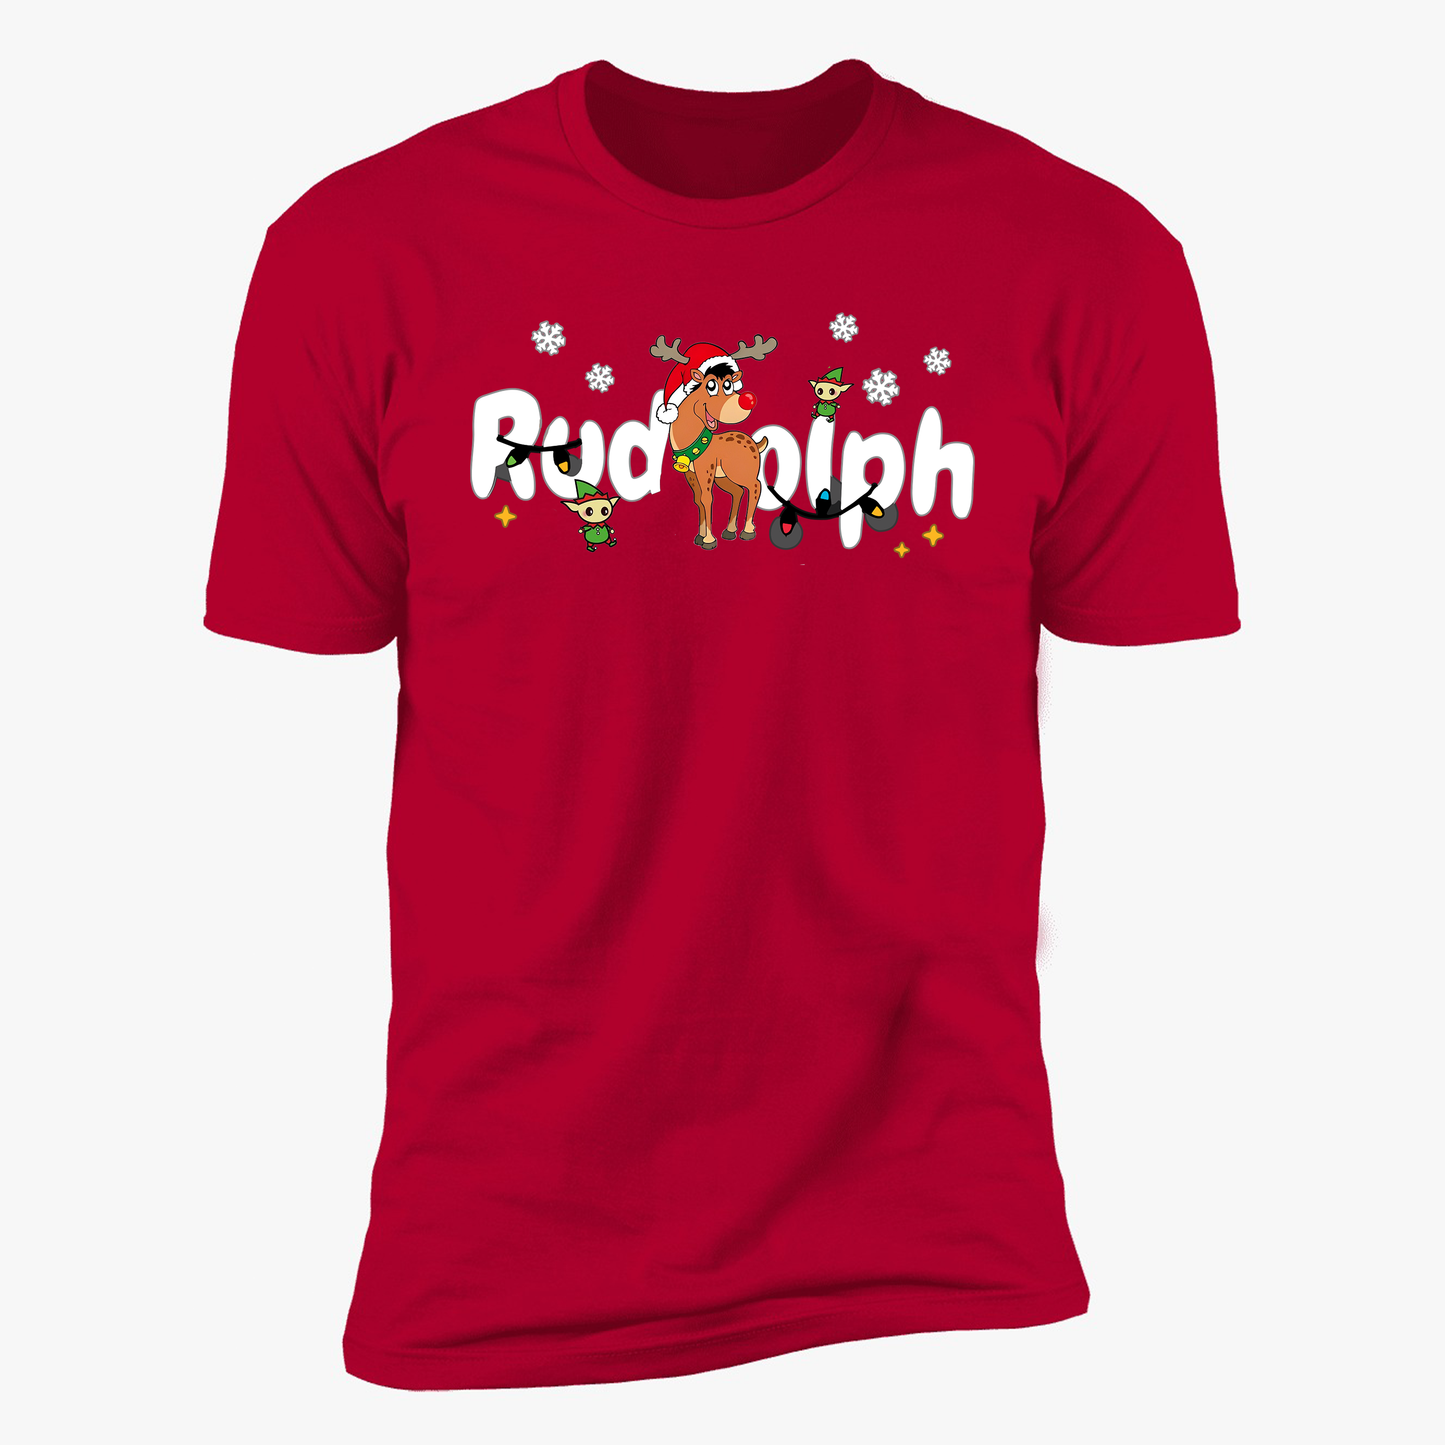 Most Likely To try To Ride Rudolph & Rudolph Red Deluxe Unisex Tees